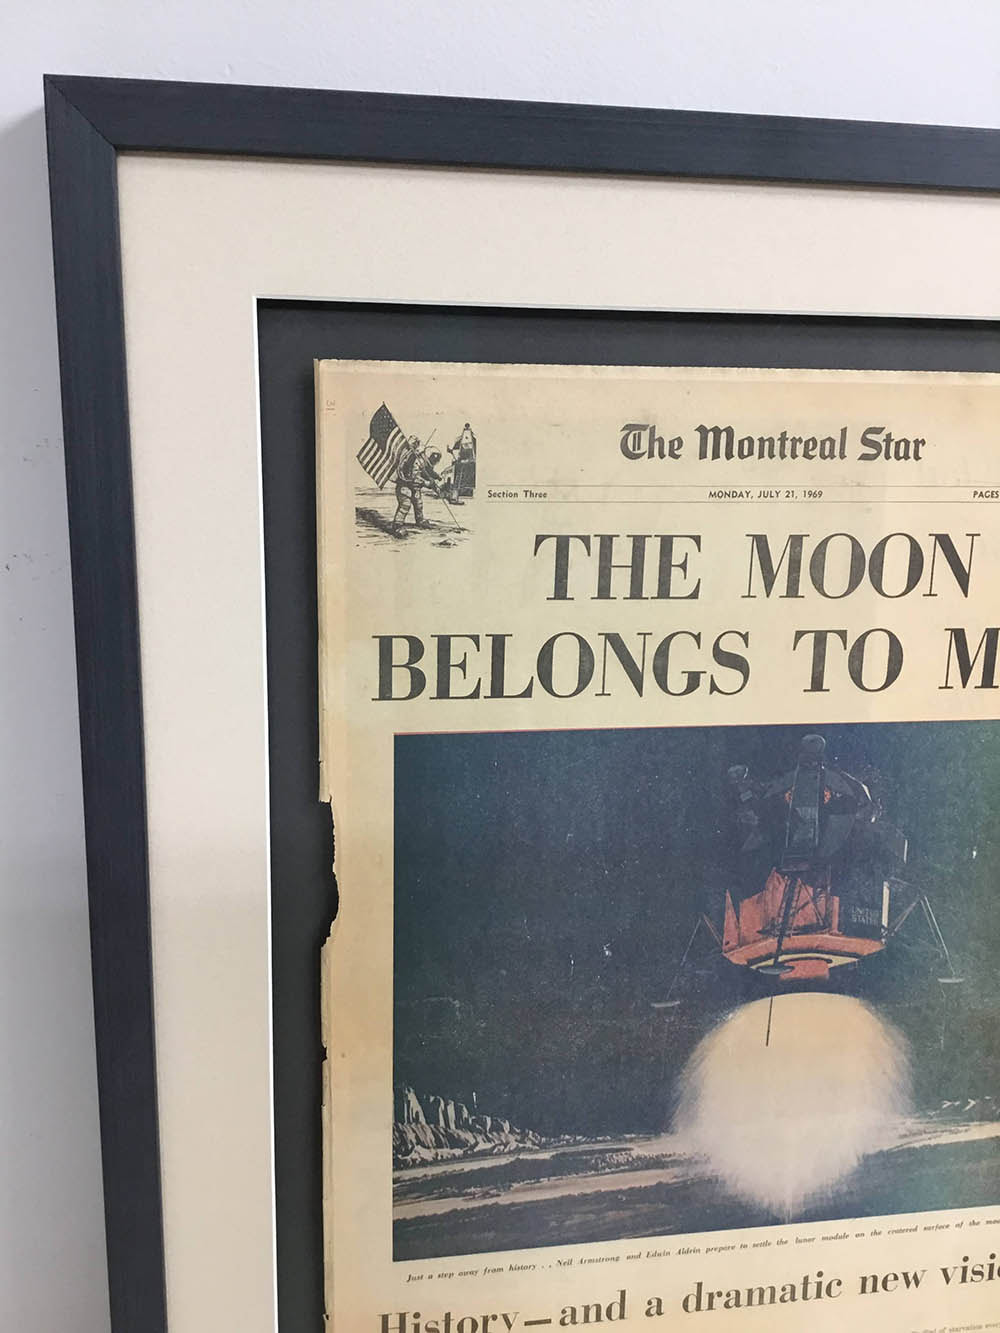 Le Frame Shoppe Blog | Fly me to the moon